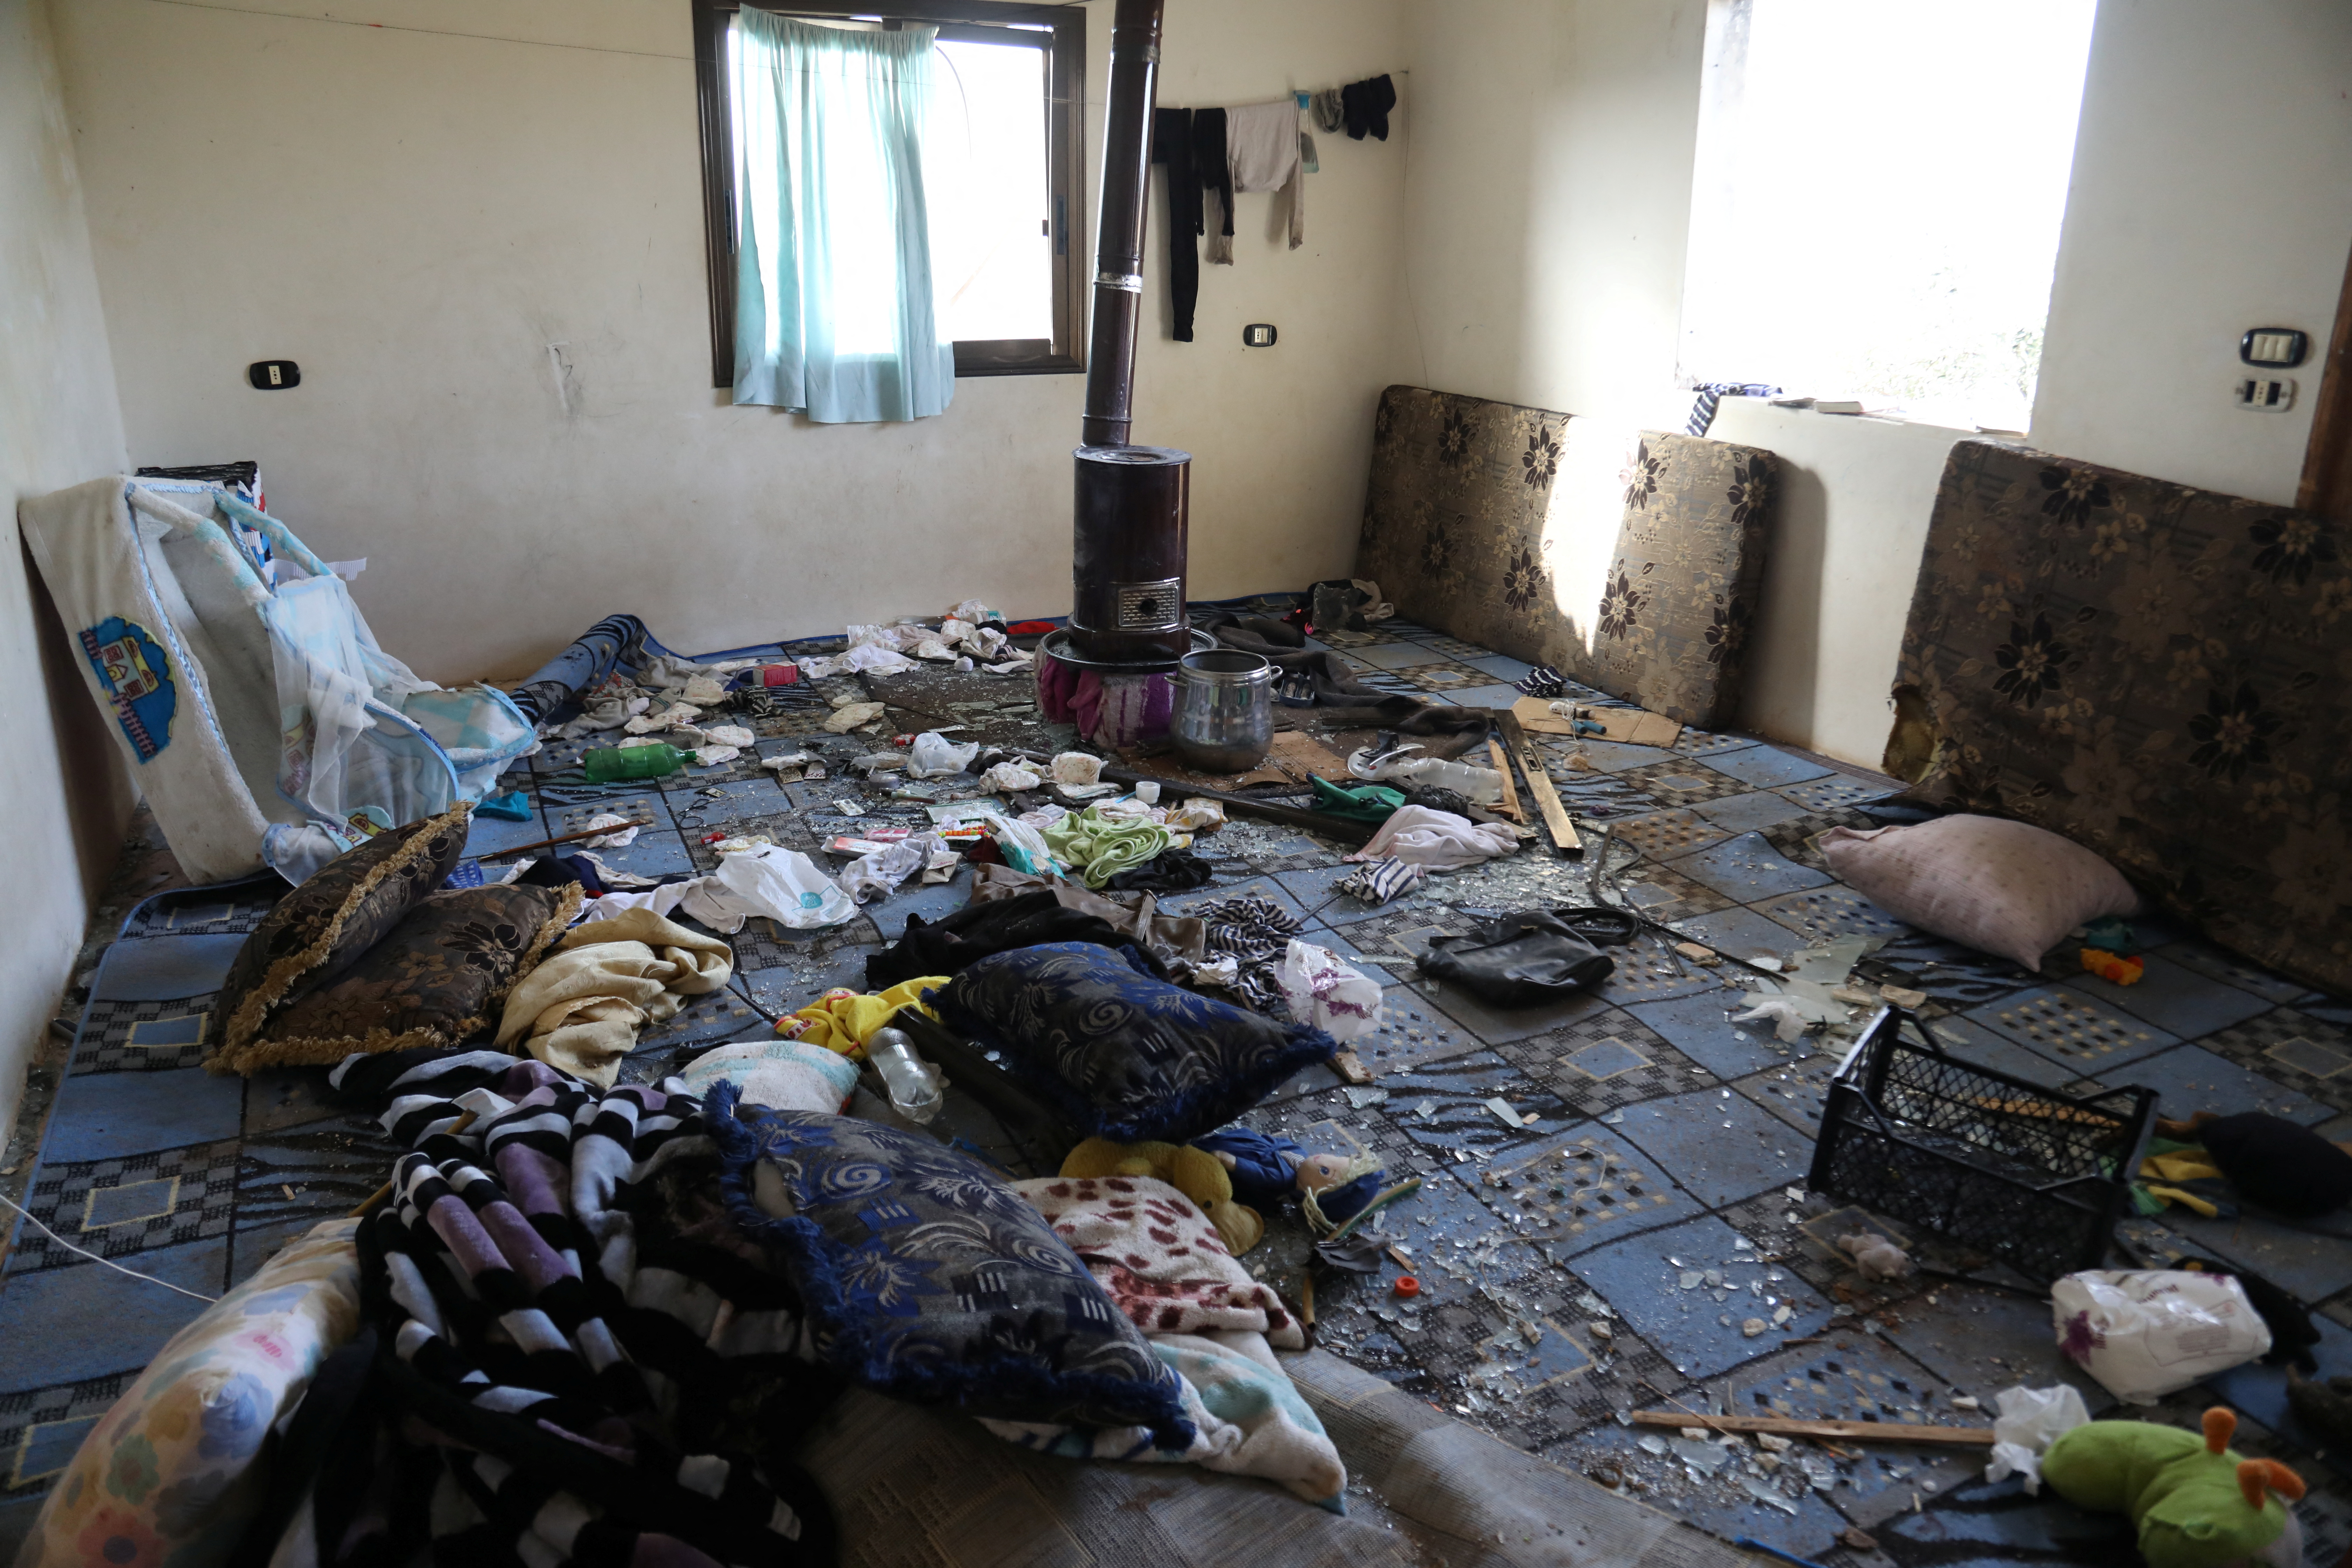 Aftermath of a counter-terrorism mission conducted by the U.S. Special Operations Forces in Atmeh